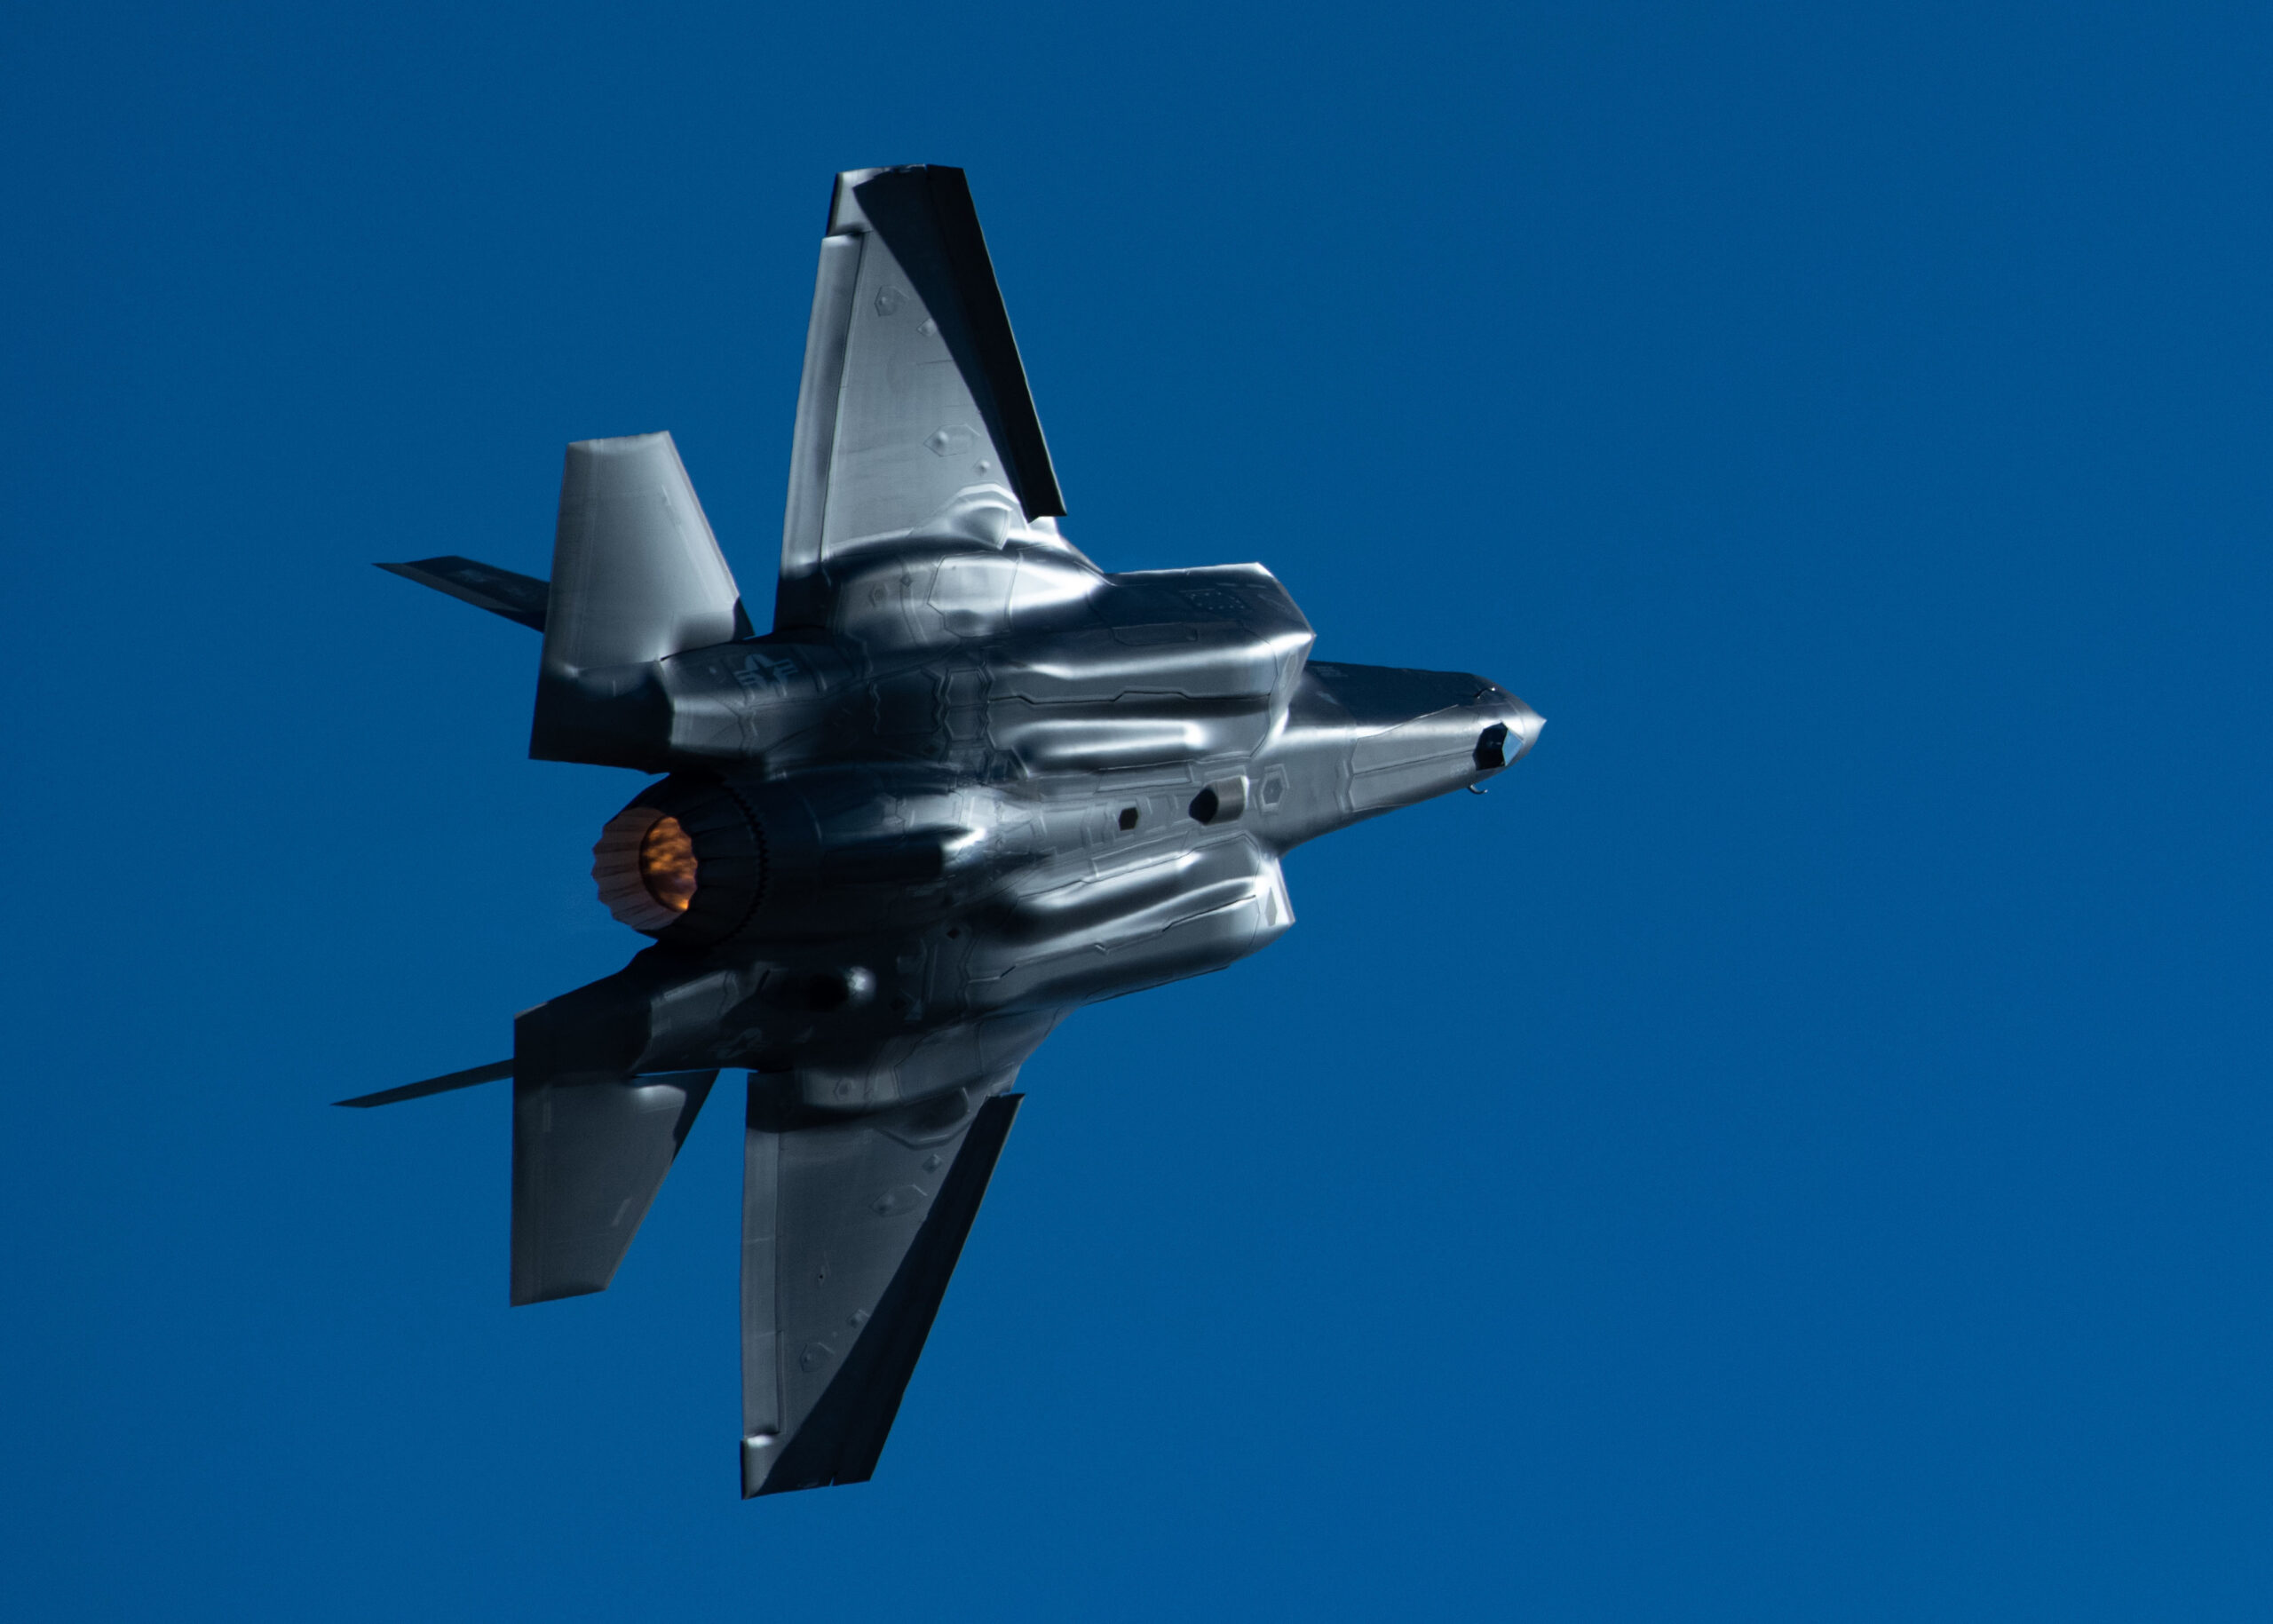 Capt. Kristin "BEO" Wolfe, F-35A Lightning II Demonstration Team pilot and commander flies during a demonstration practice Feb. 20, 2020, at Hill Air Force Base, Utah. The team is scheduled to perform at approximately 20 air shows throughout their inaugural year. (U.S. Air Force photo by Staff Sgt. Anastasia Tompkins)